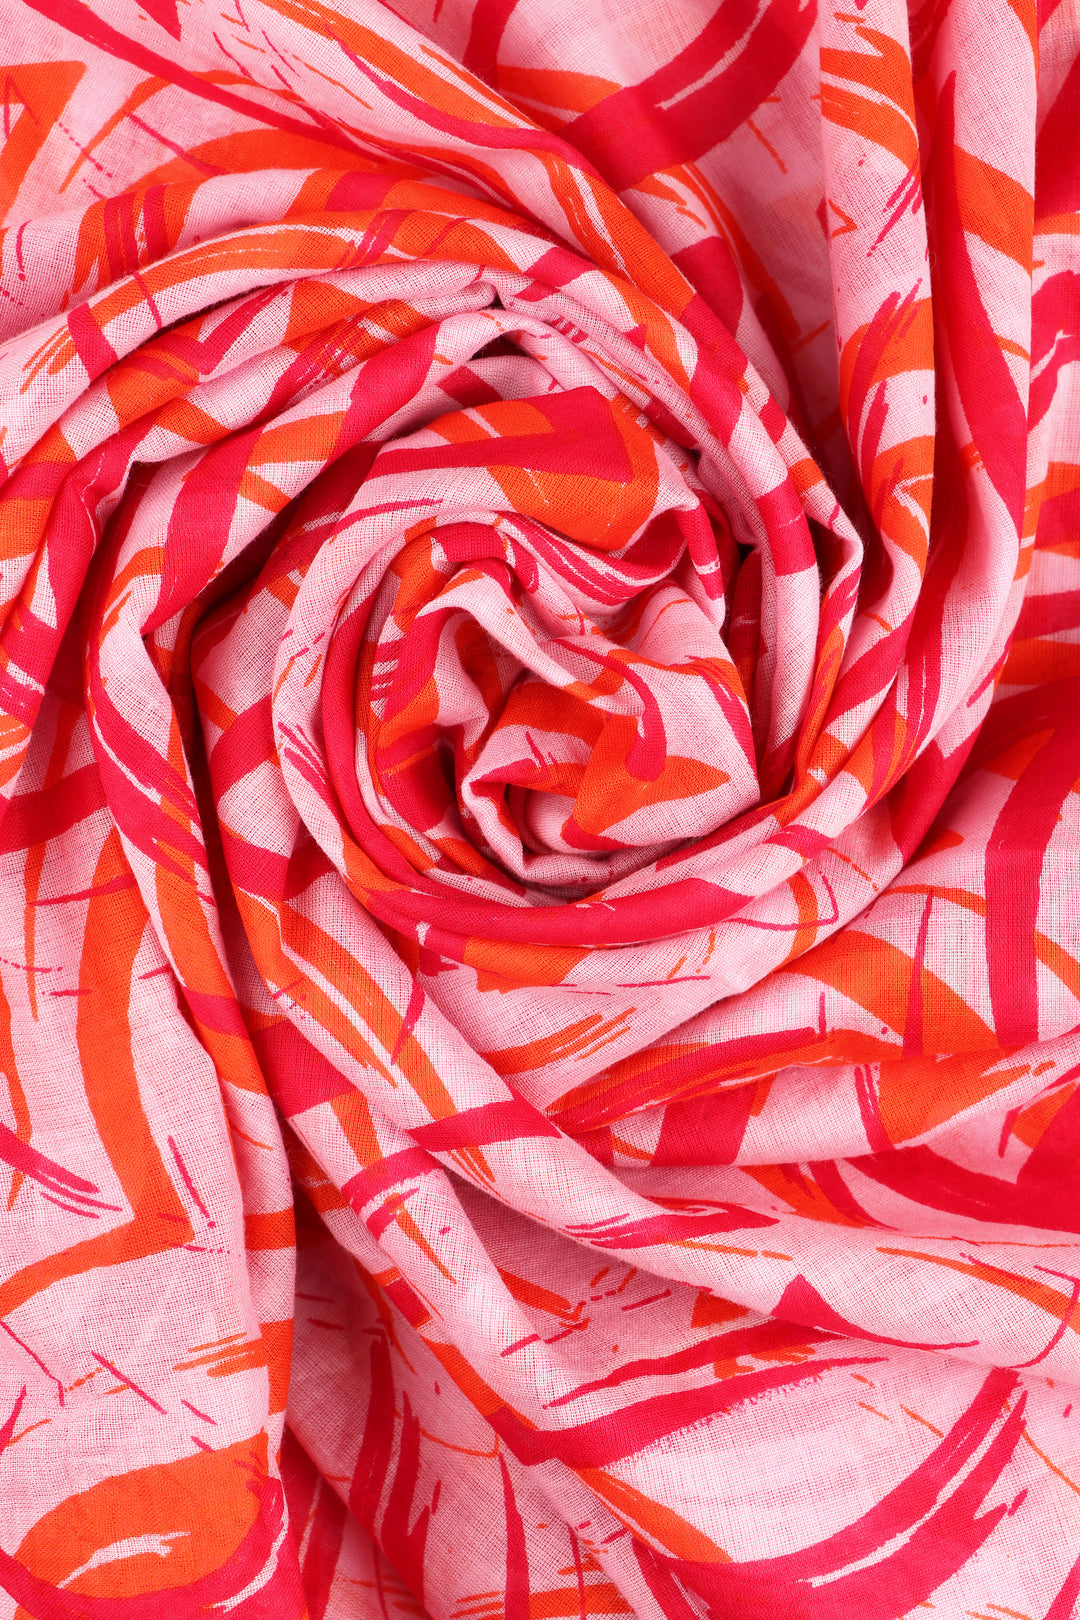 close up of the soft lightweight cotton material of the pink scarf